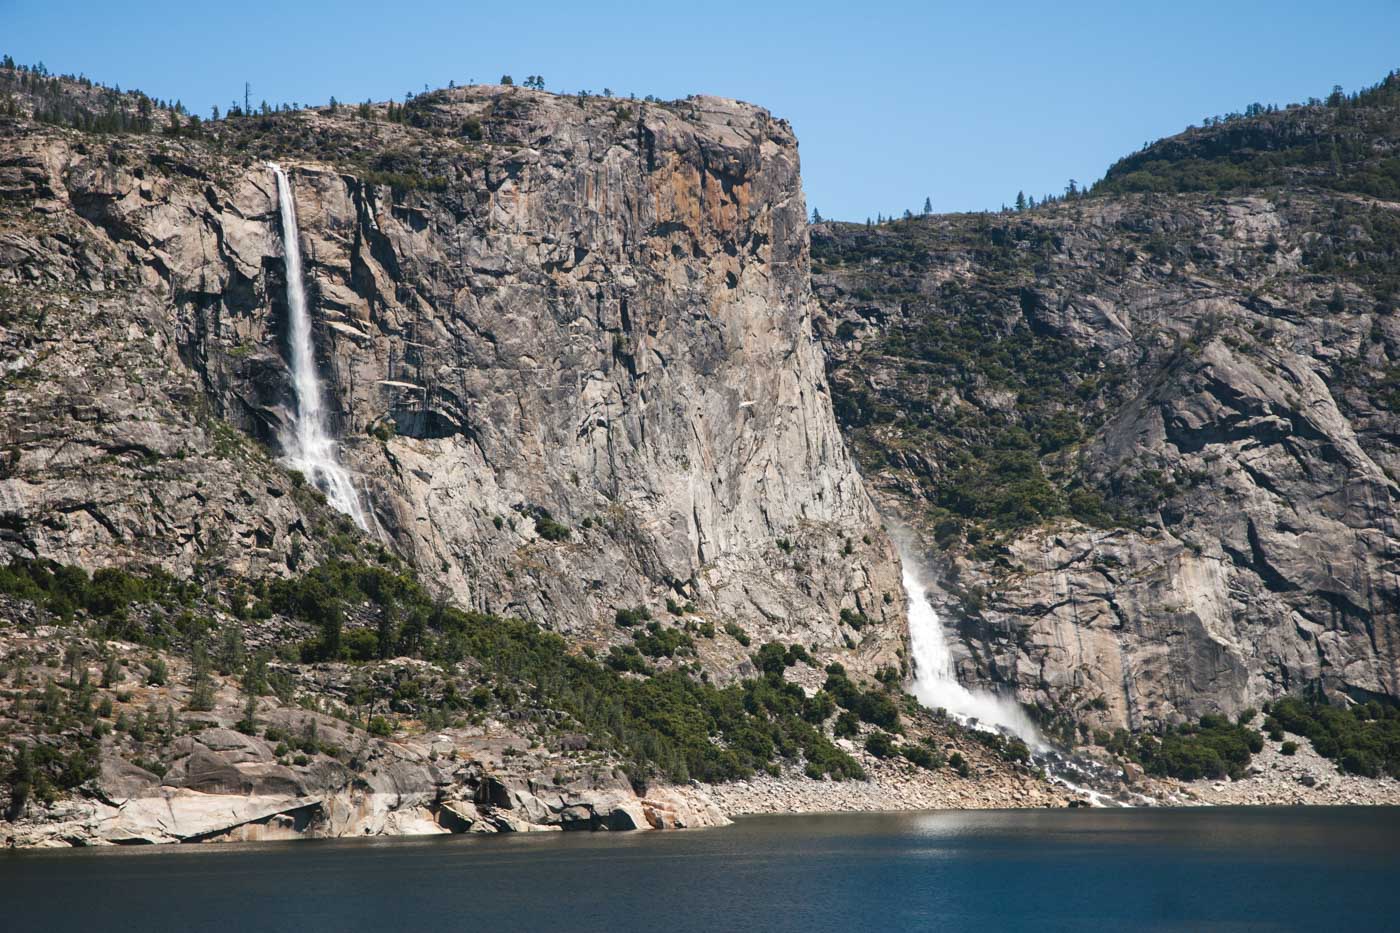 A view of Tueeulala Falls and Wapama Falls next to each other in the mountains of Yosemite.